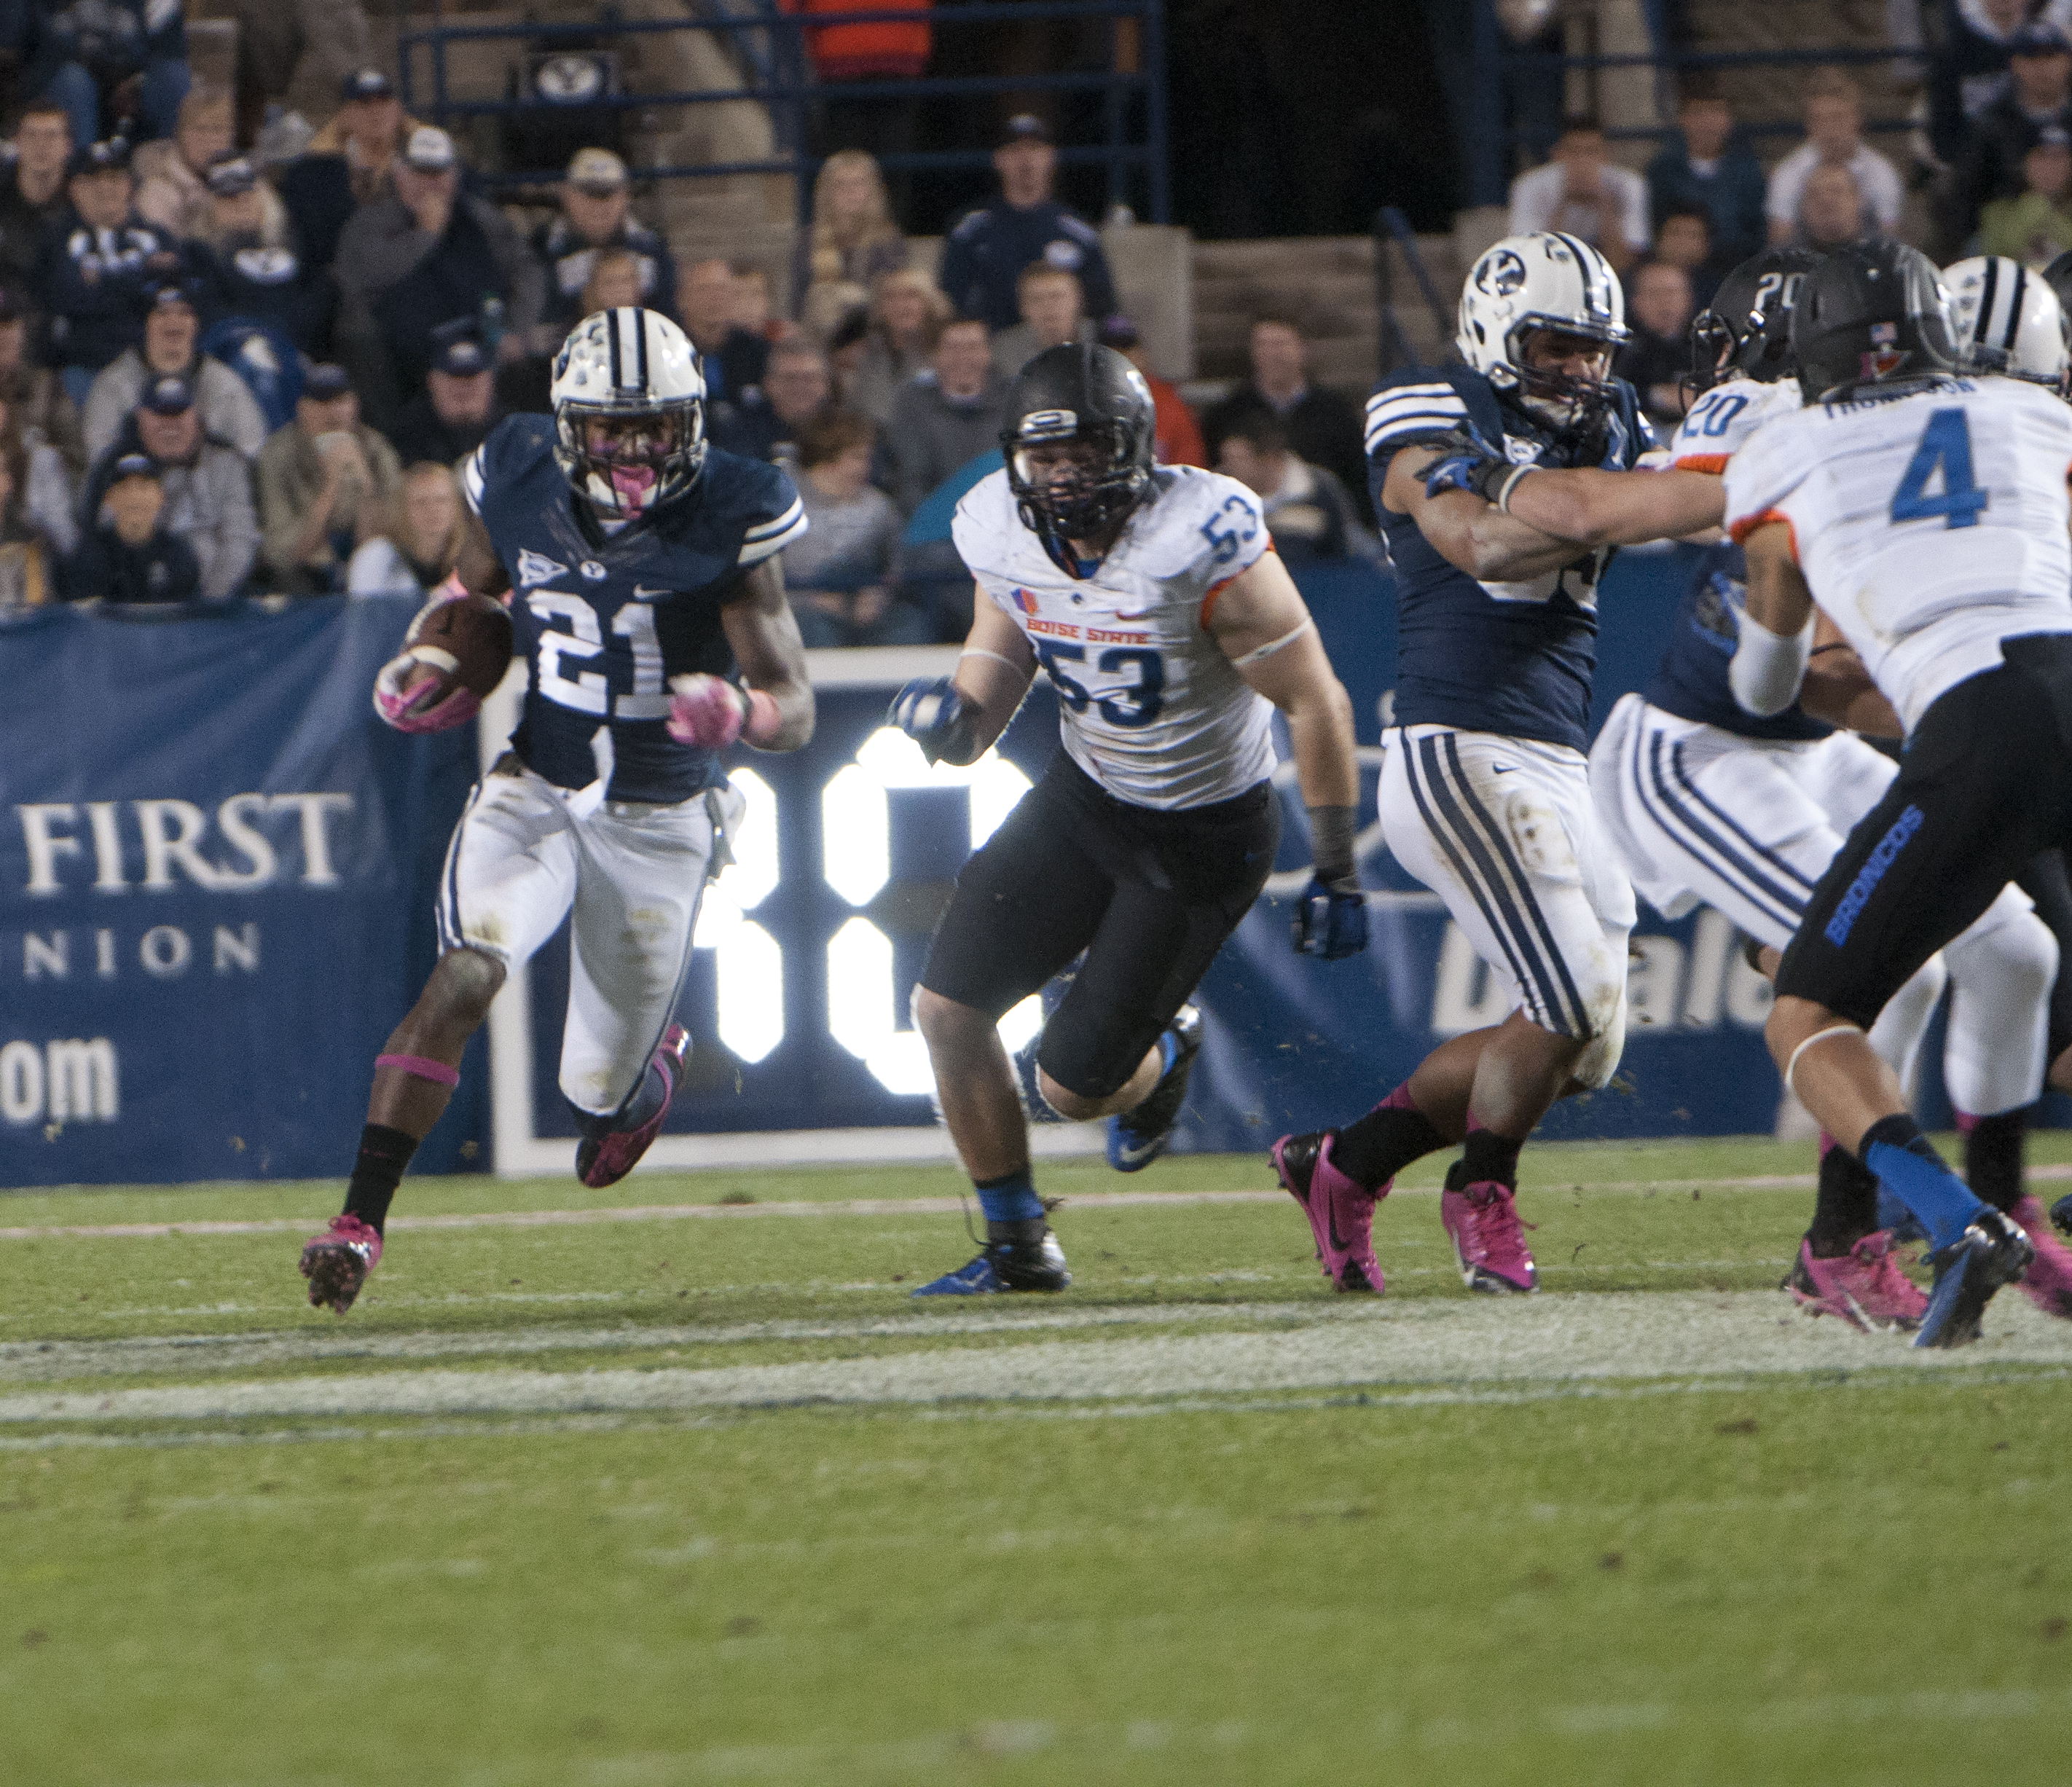 Jamaal Williams outruns his Bronco defender in the Boise State vs. BYU game. (Photo by Maddi Dayton)